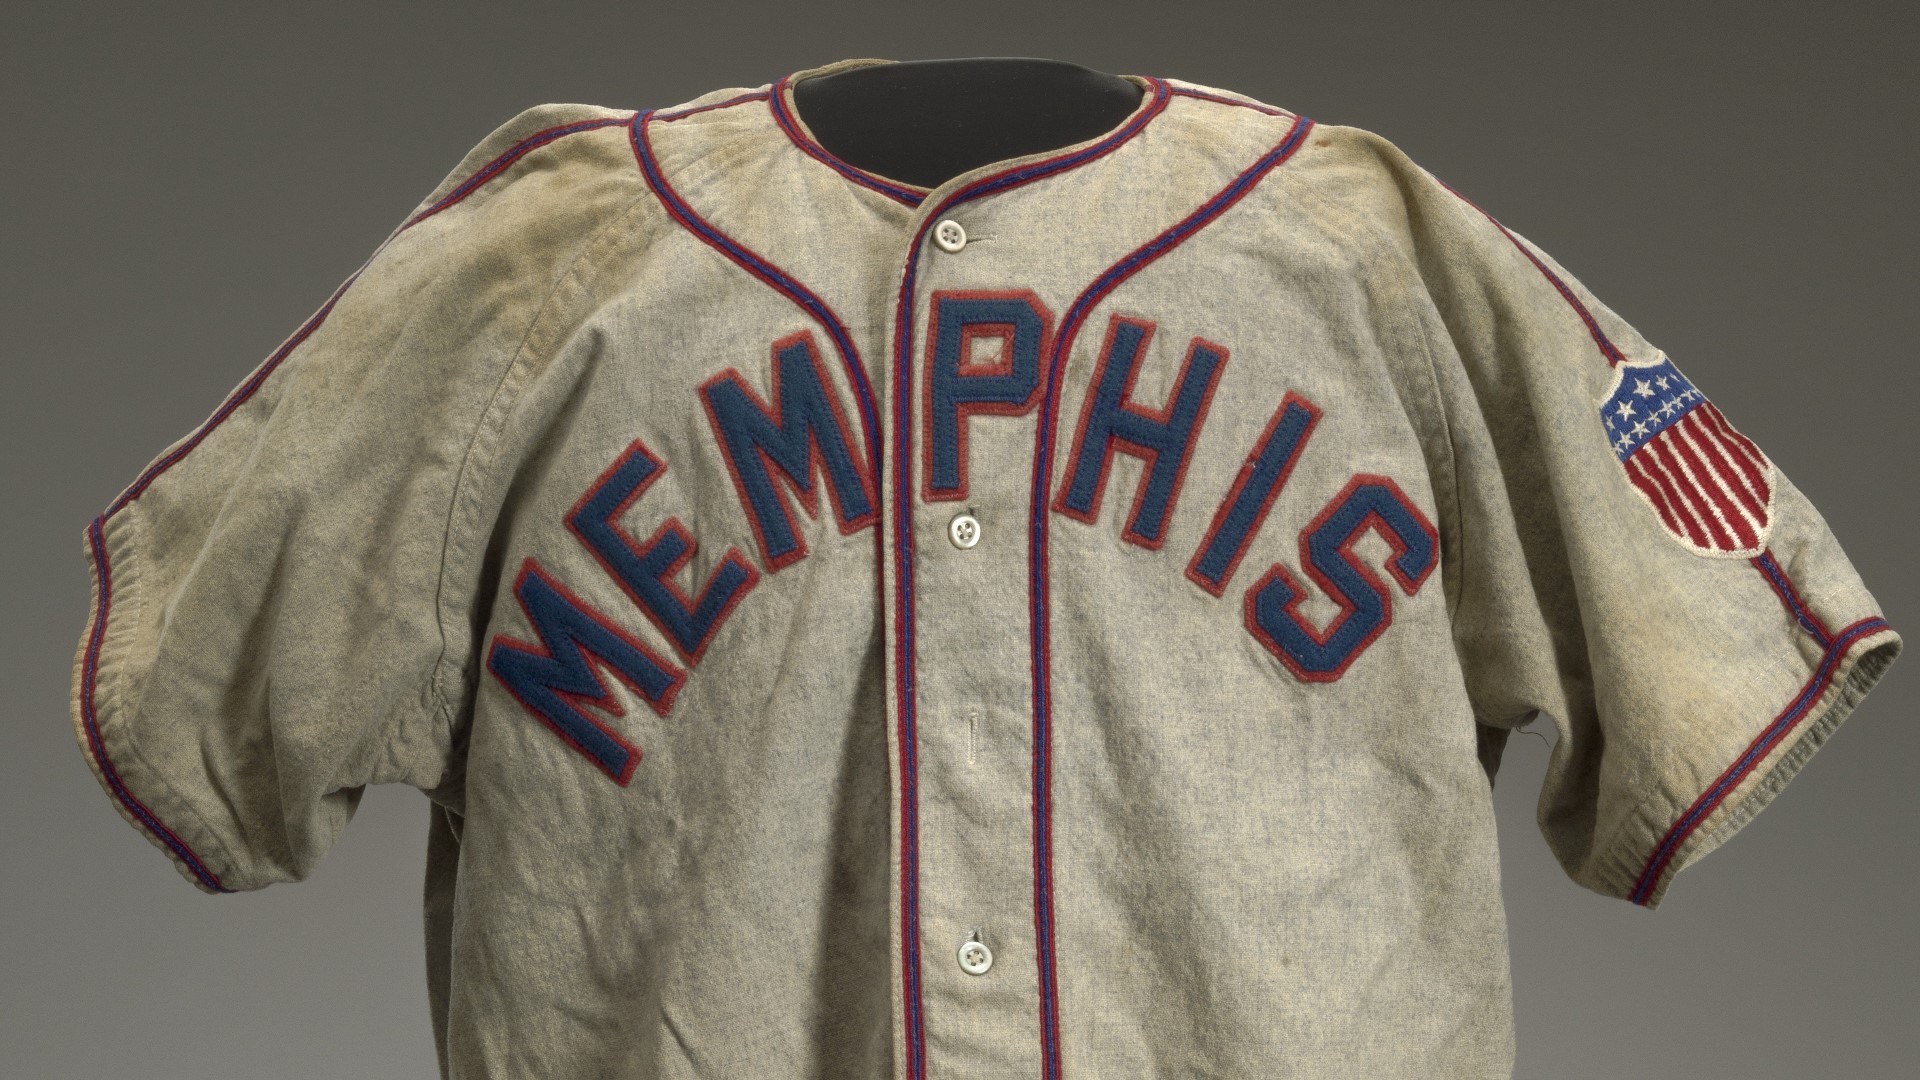 Despite being known for basketball, Memphis has a storied history in baseball. Included in that history are the Memphis Red Sox, a Black, family-owned team.